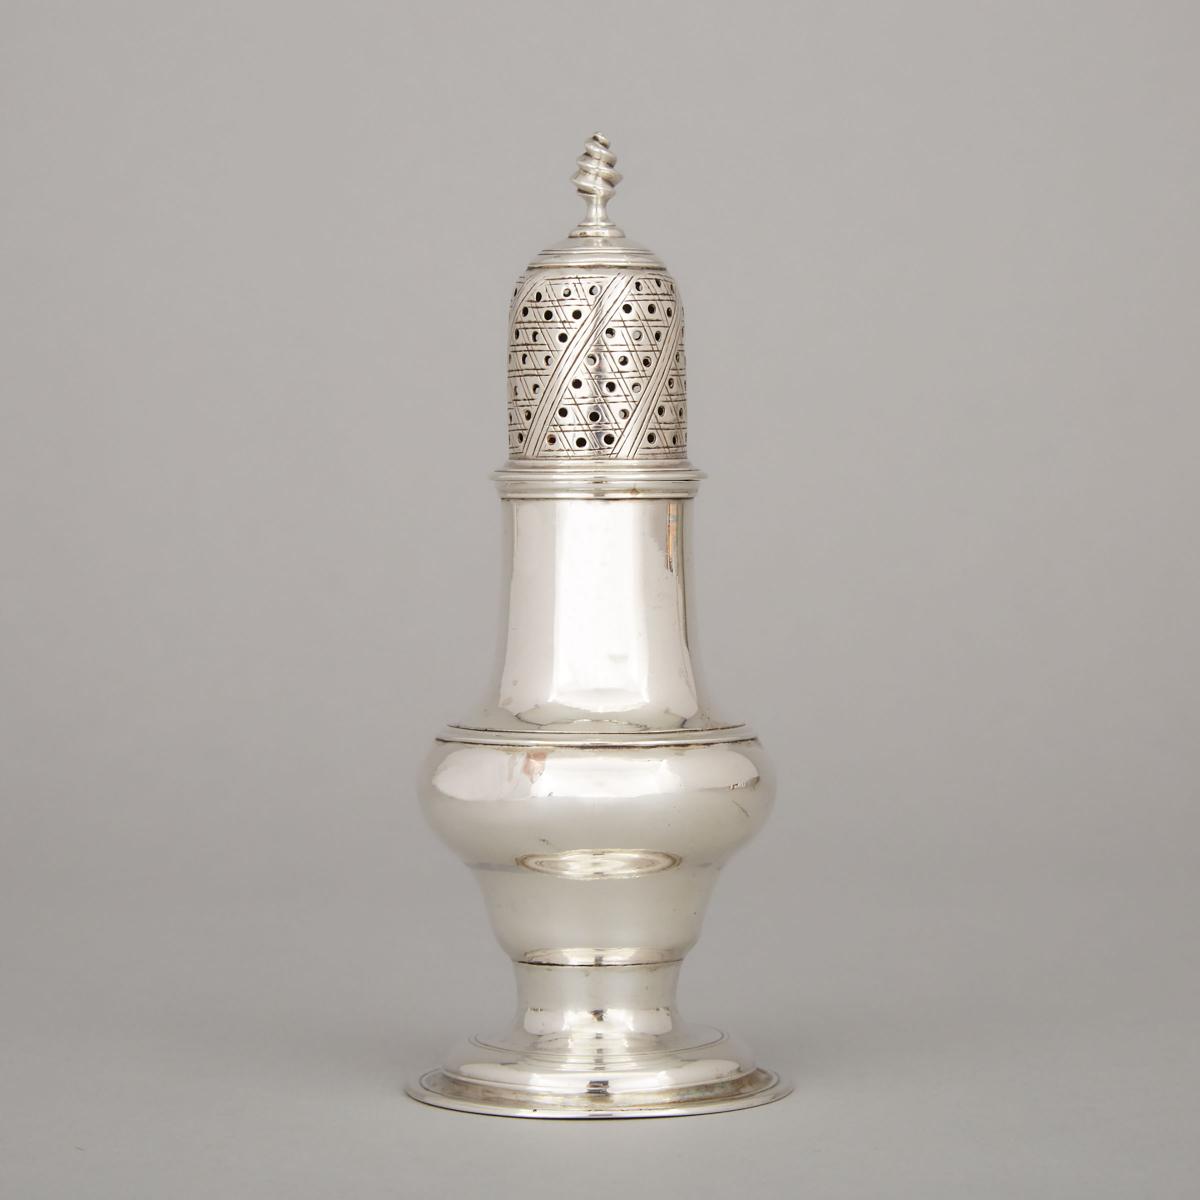 George III Silver Baluster Caster, Thomas Daniell, London, 1774, height 5.5 in — 14 cm